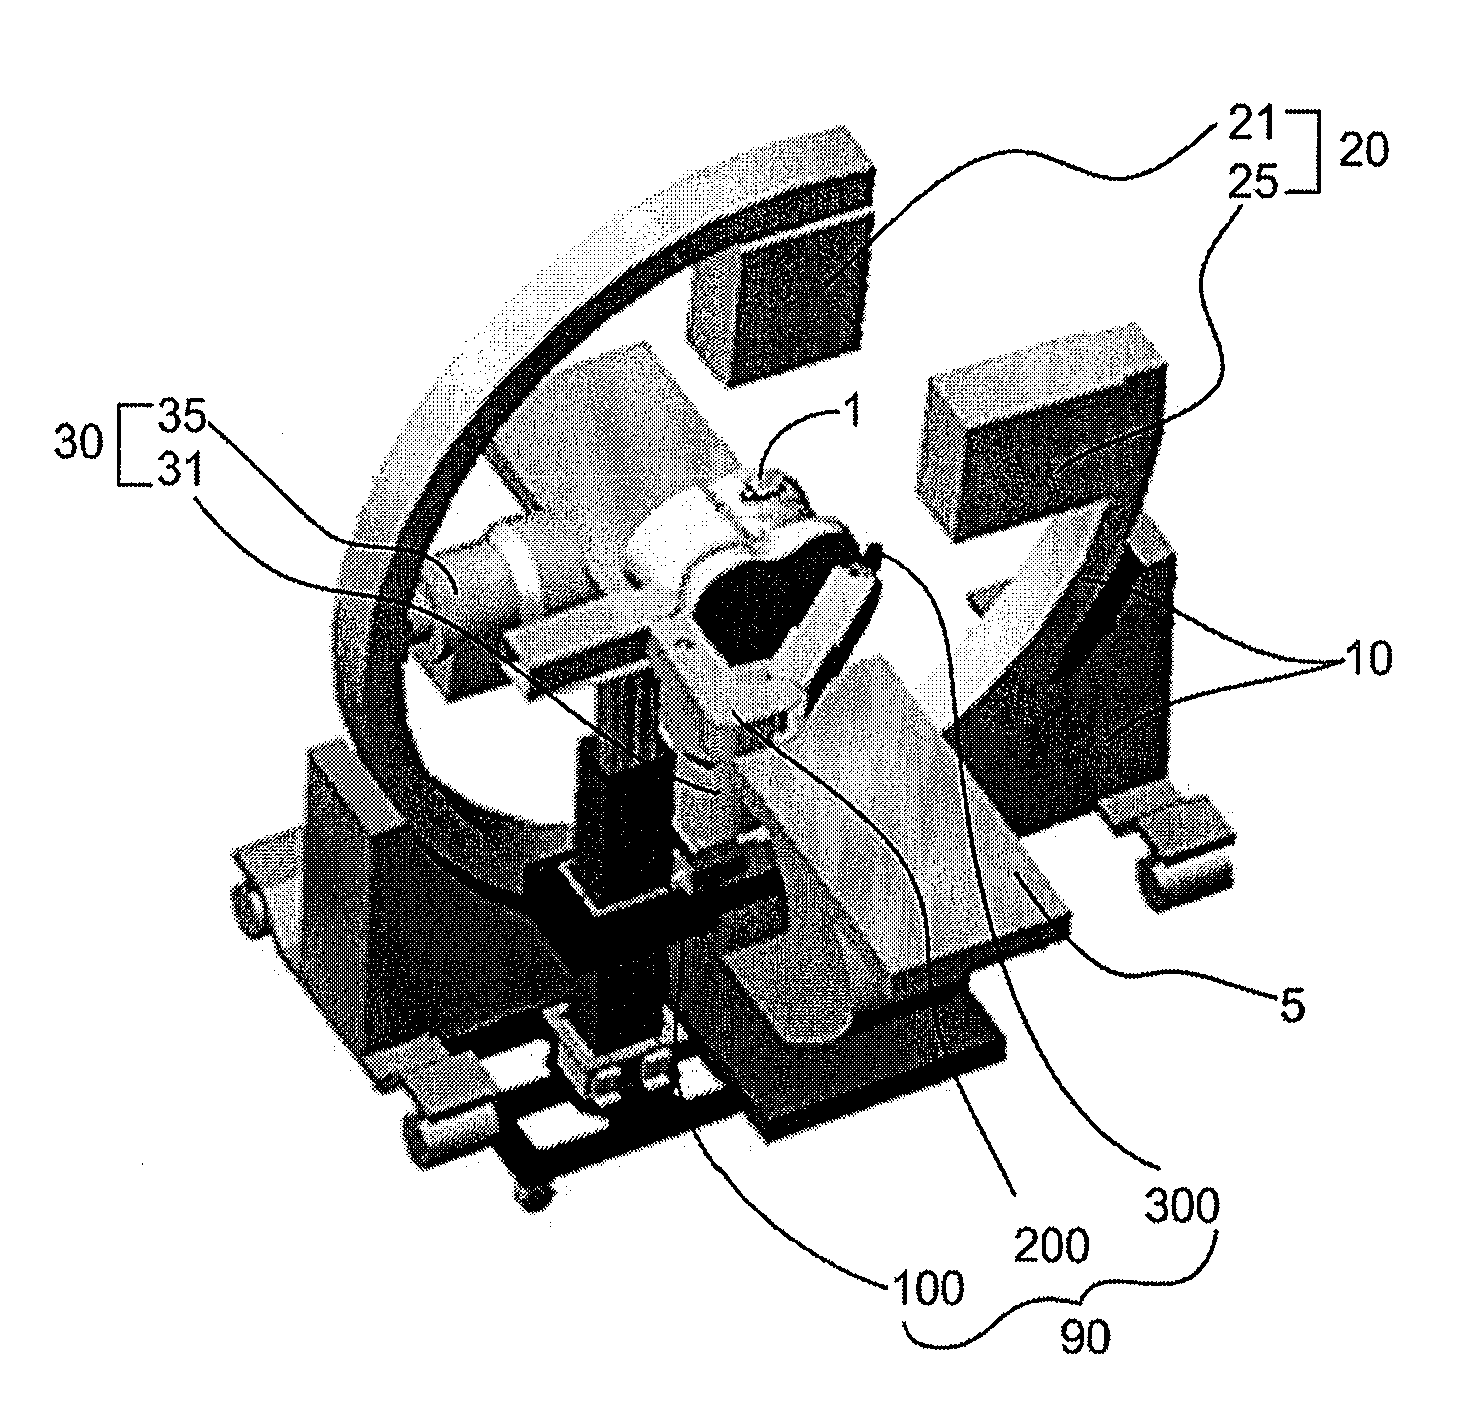 Bi-planar fluoroscopy guided robot system for minimally invasive surgery and the control method thereof